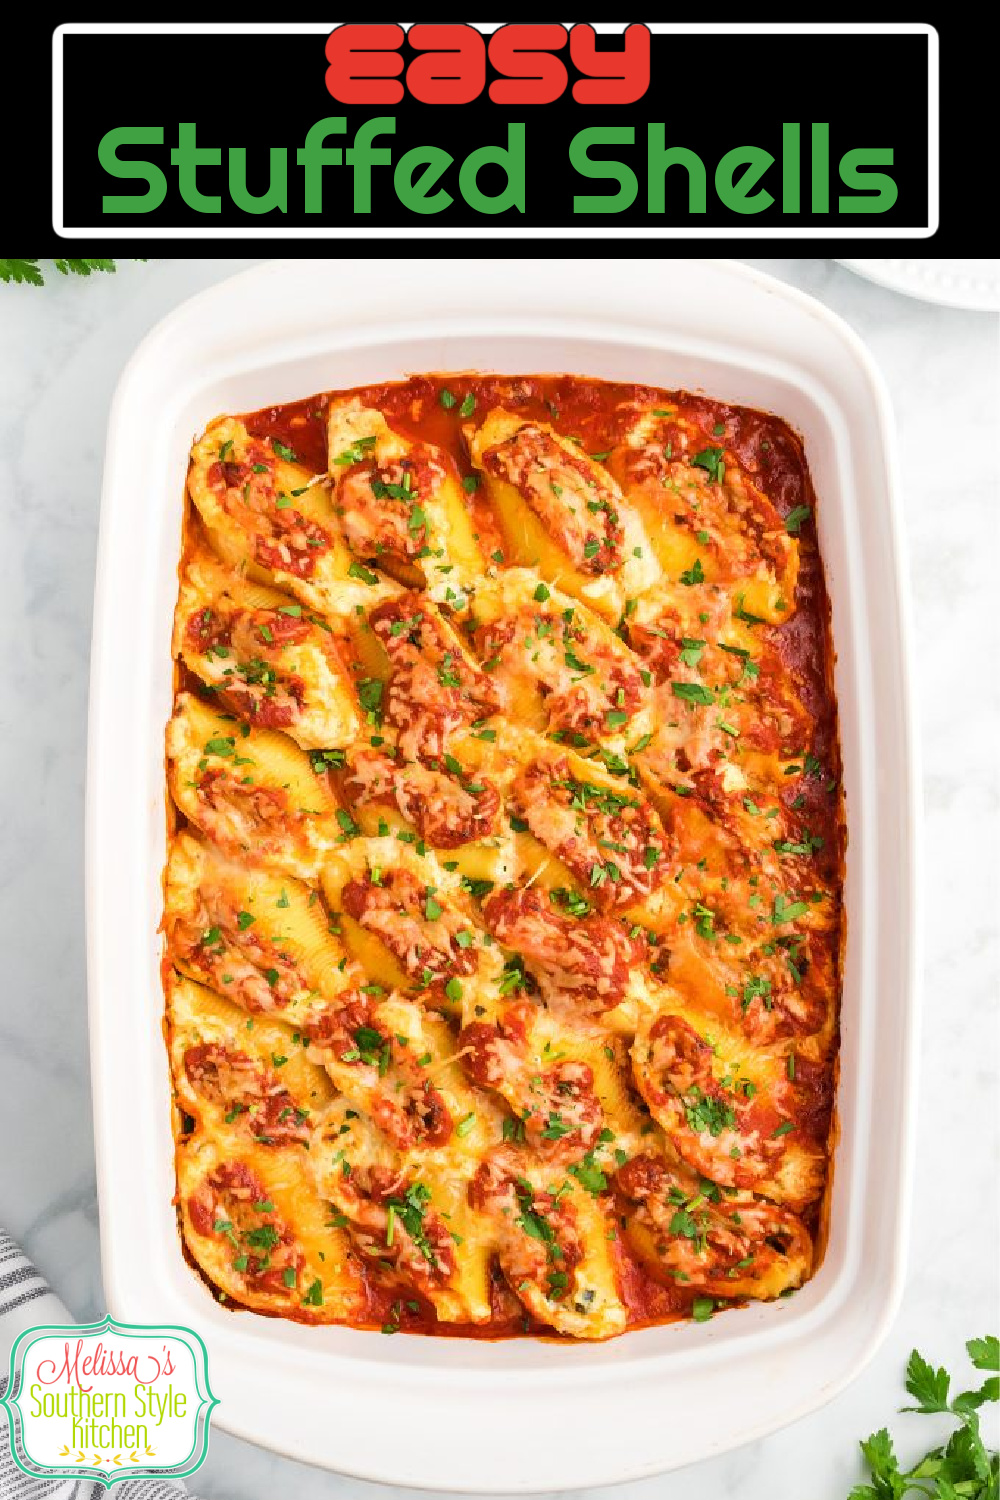 This easy cheese Stuffed Shells Recipe can be enjoyed as a flavorful main course or a side dish with your favorite Italian inspired entrées #stuffedshells #stuffedshellsrecipes #italianfood #pastarecipes #casseroles #vegetarianstuffedshells